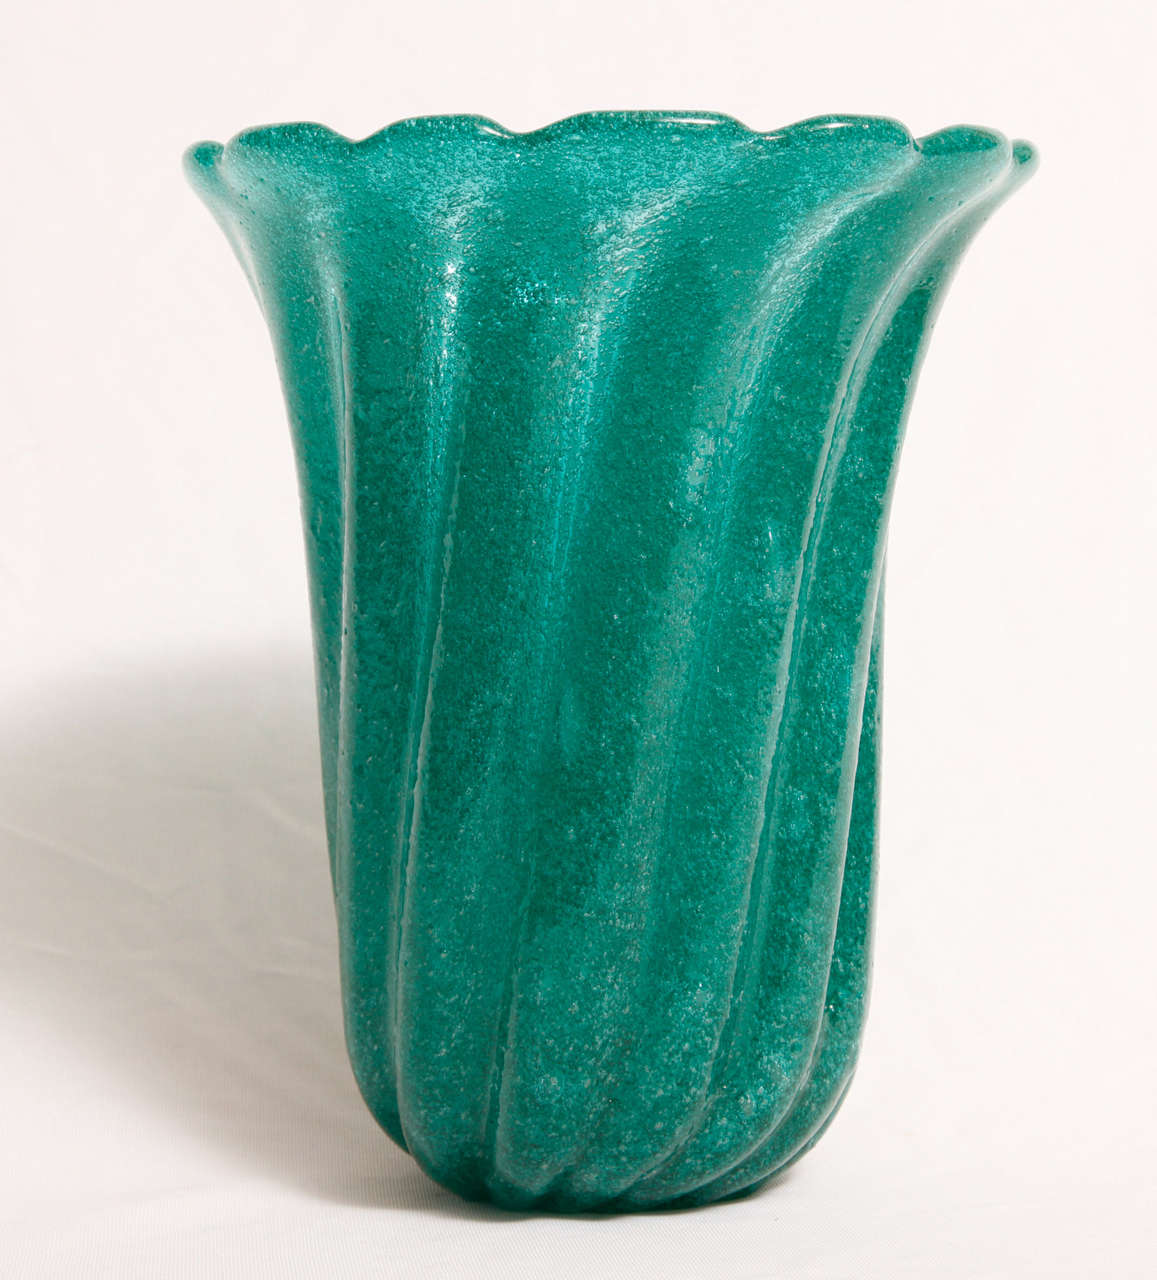 Tall vase in 'Verde mare Pulegoso' glass by the Italian glass designer Flavio Poli (1900-1984) and executed by Seguso Vetri d'Arte, glassworks in Murano (IT). Venetian retailer period paper label under the vase.
This vase illustrated in Marc